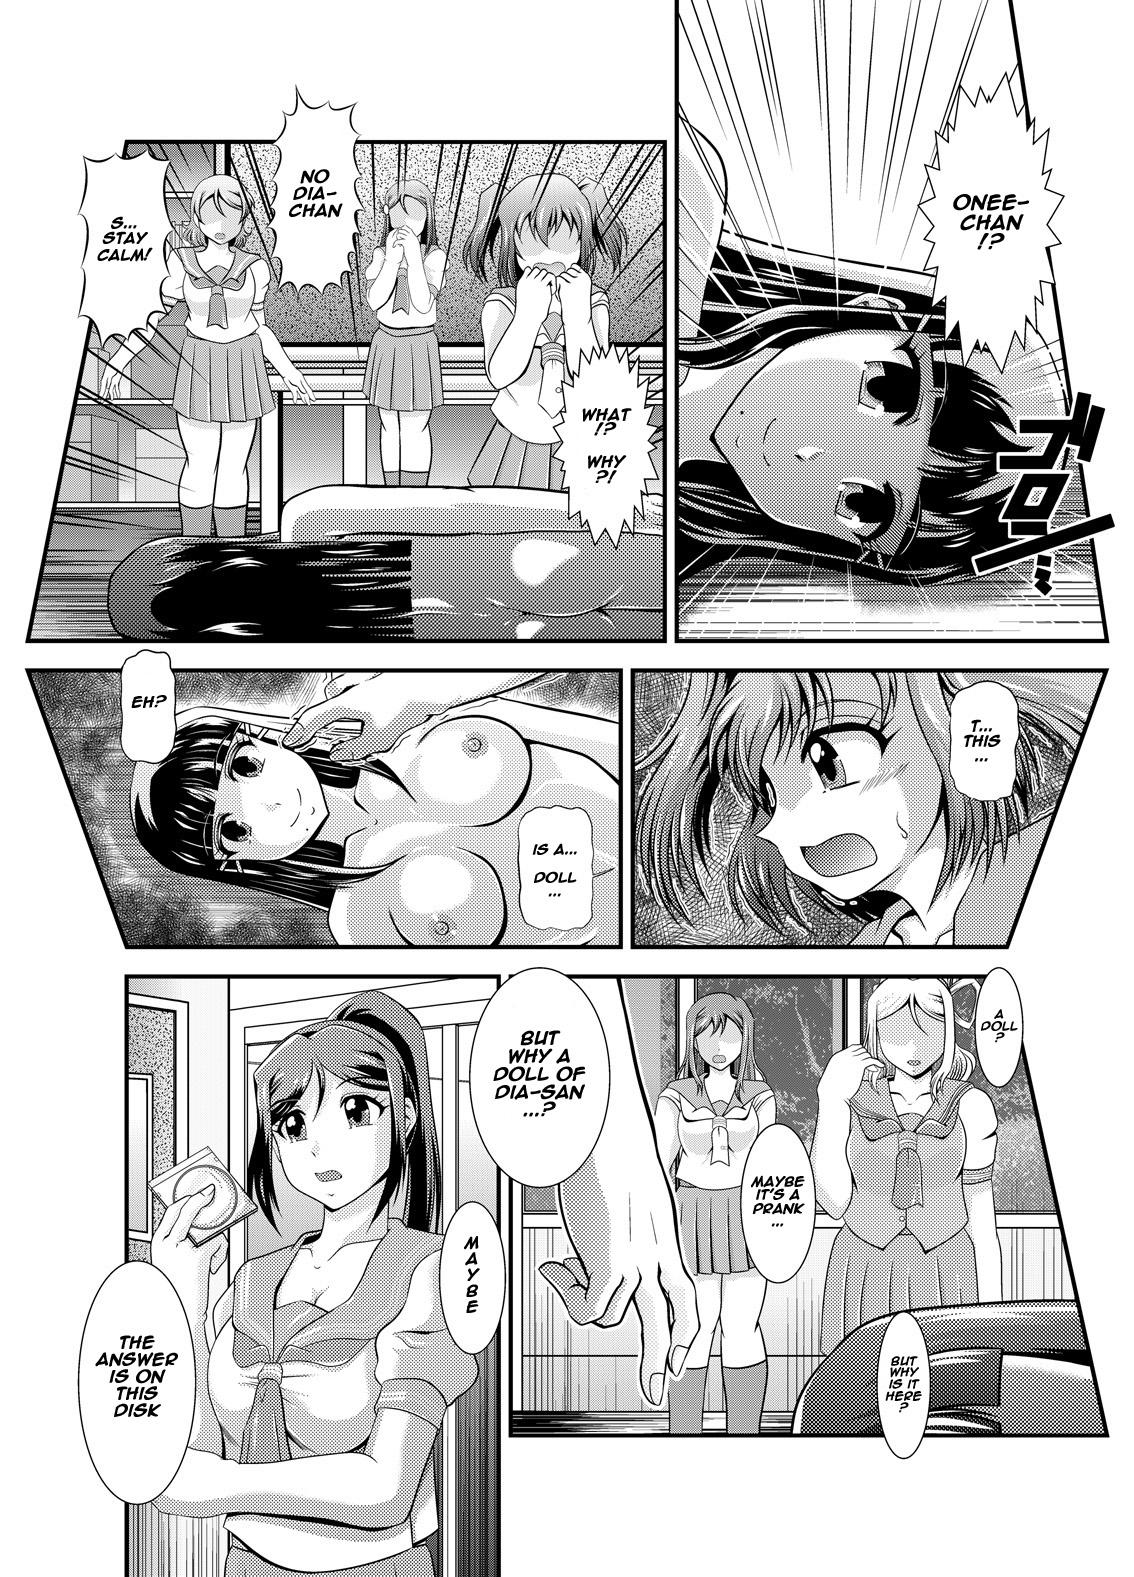 Hot Girl Fucking ProjectAqours EP01DIAMONDS - Love live sunshine Oldvsyoung - Page 5